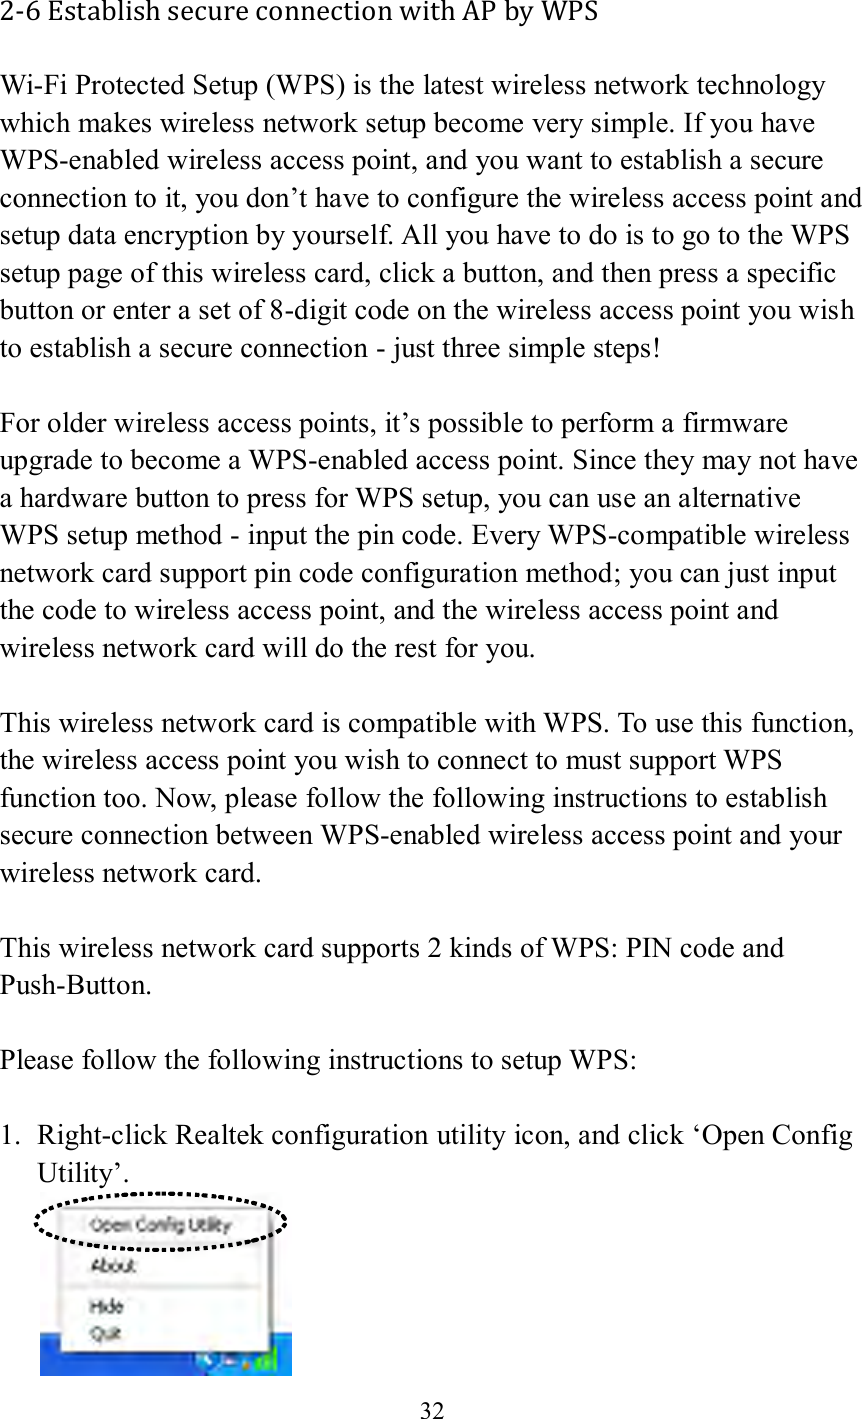 32  2-6 Establish secure connection with AP by WPS Wi-Fi Protected Setup (WPS) is the latest wireless network technology which makes wireless network setup become very simple. If you have WPS-enabled wireless access point, and you want to establish a secure connection to it, you don’t have to configure the wireless access point and setup data encryption by yourself. All you have to do is to go to the WPS setup page of this wireless card, click a button, and then press a specific button or enter a set of 8-digit code on the wireless access point you wish to establish a secure connection - just three simple steps!    For older wireless access points, it’s possible to perform a firmware upgrade to become a WPS-enabled access point. Since they may not have a hardware button to press for WPS setup, you can use an alternative WPS setup method - input the pin code. Every WPS-compatible wireless network card support pin code configuration method; you can just input the code to wireless access point, and the wireless access point and wireless network card will do the rest for you.  This wireless network card is compatible with WPS. To use this function, the wireless access point you wish to connect to must support WPS function too. Now, please follow the following instructions to establish secure connection between WPS-enabled wireless access point and your wireless network card.  This wireless network card supports 2 kinds of WPS: PIN code and Push-Button.    Please follow the following instructions to setup WPS:  1. Right-click Realtek configuration utility icon, and click ‘Open Config Utility’.  